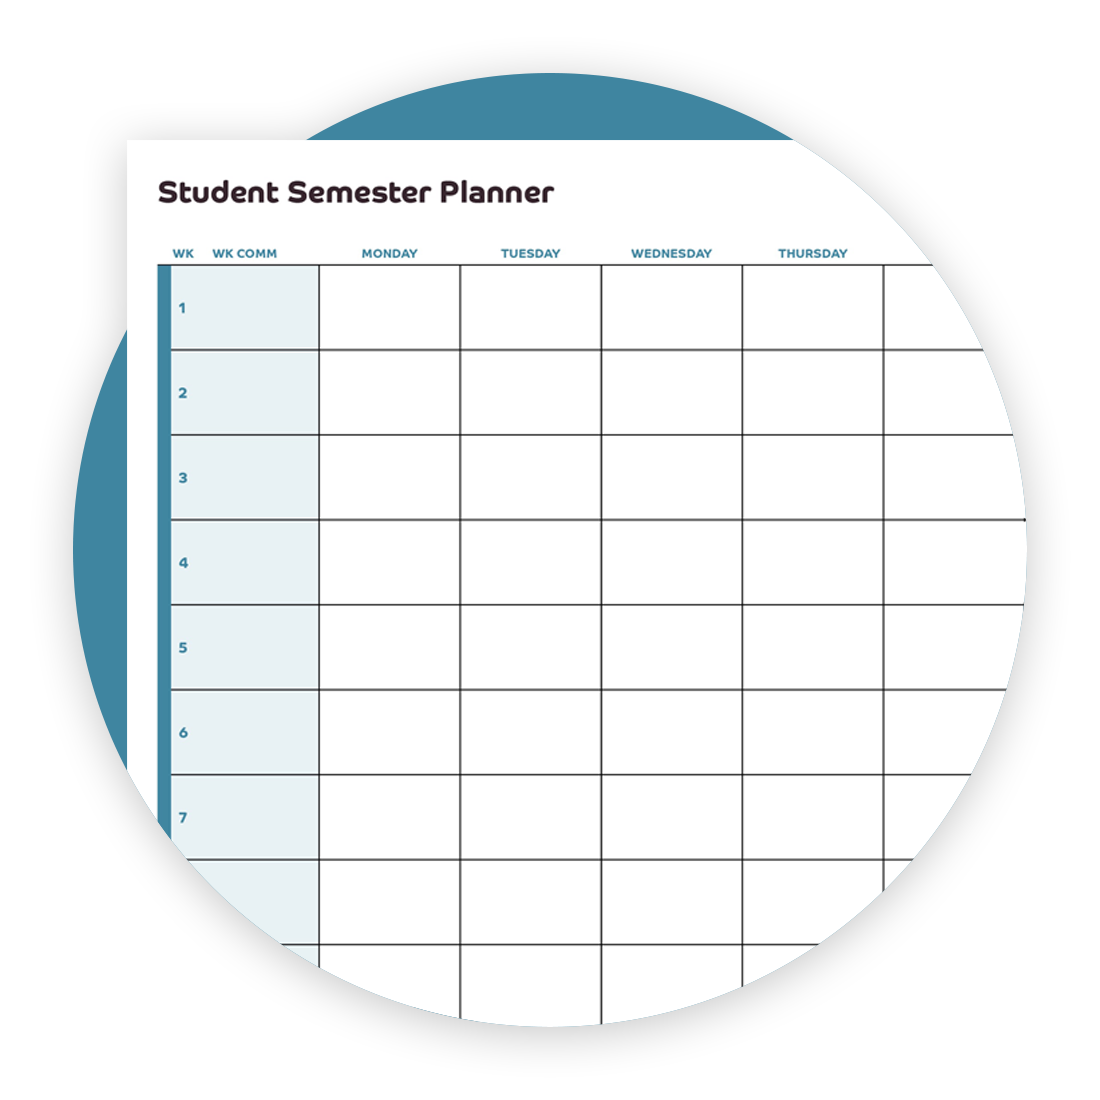 Organising Students - Image of the Student Semester Planner